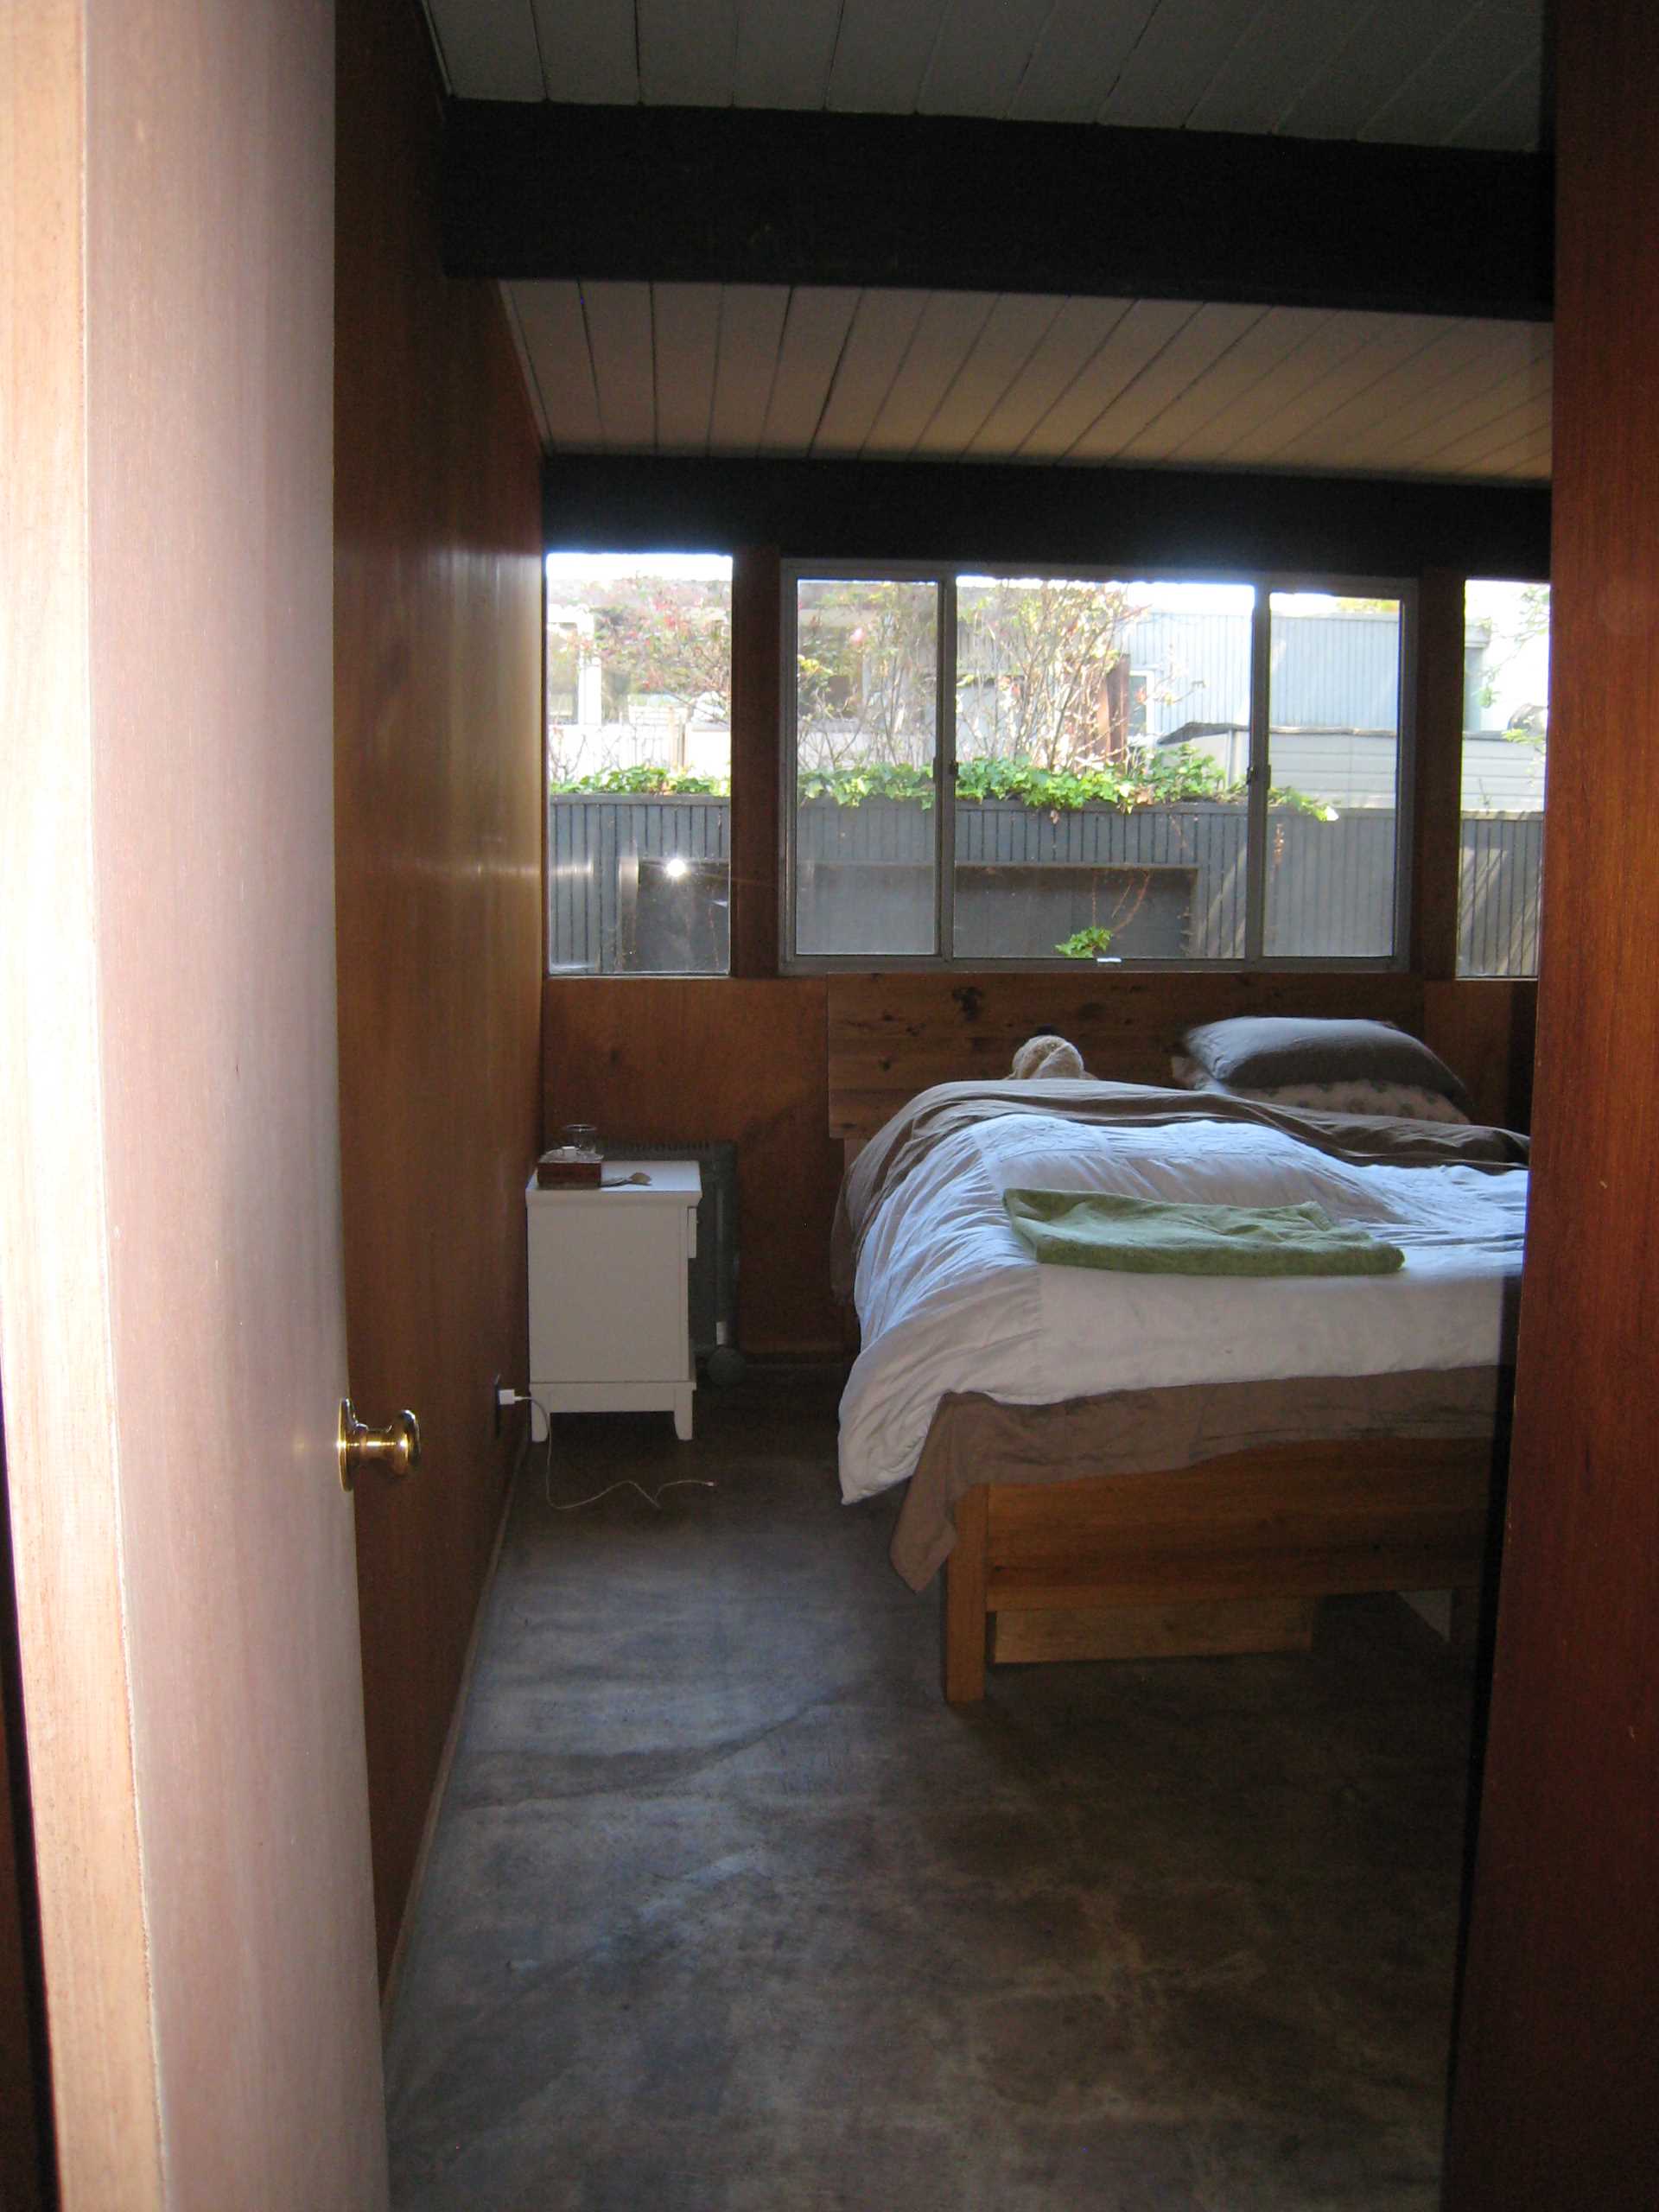 'Before' bedroom photo of an Eichler home.